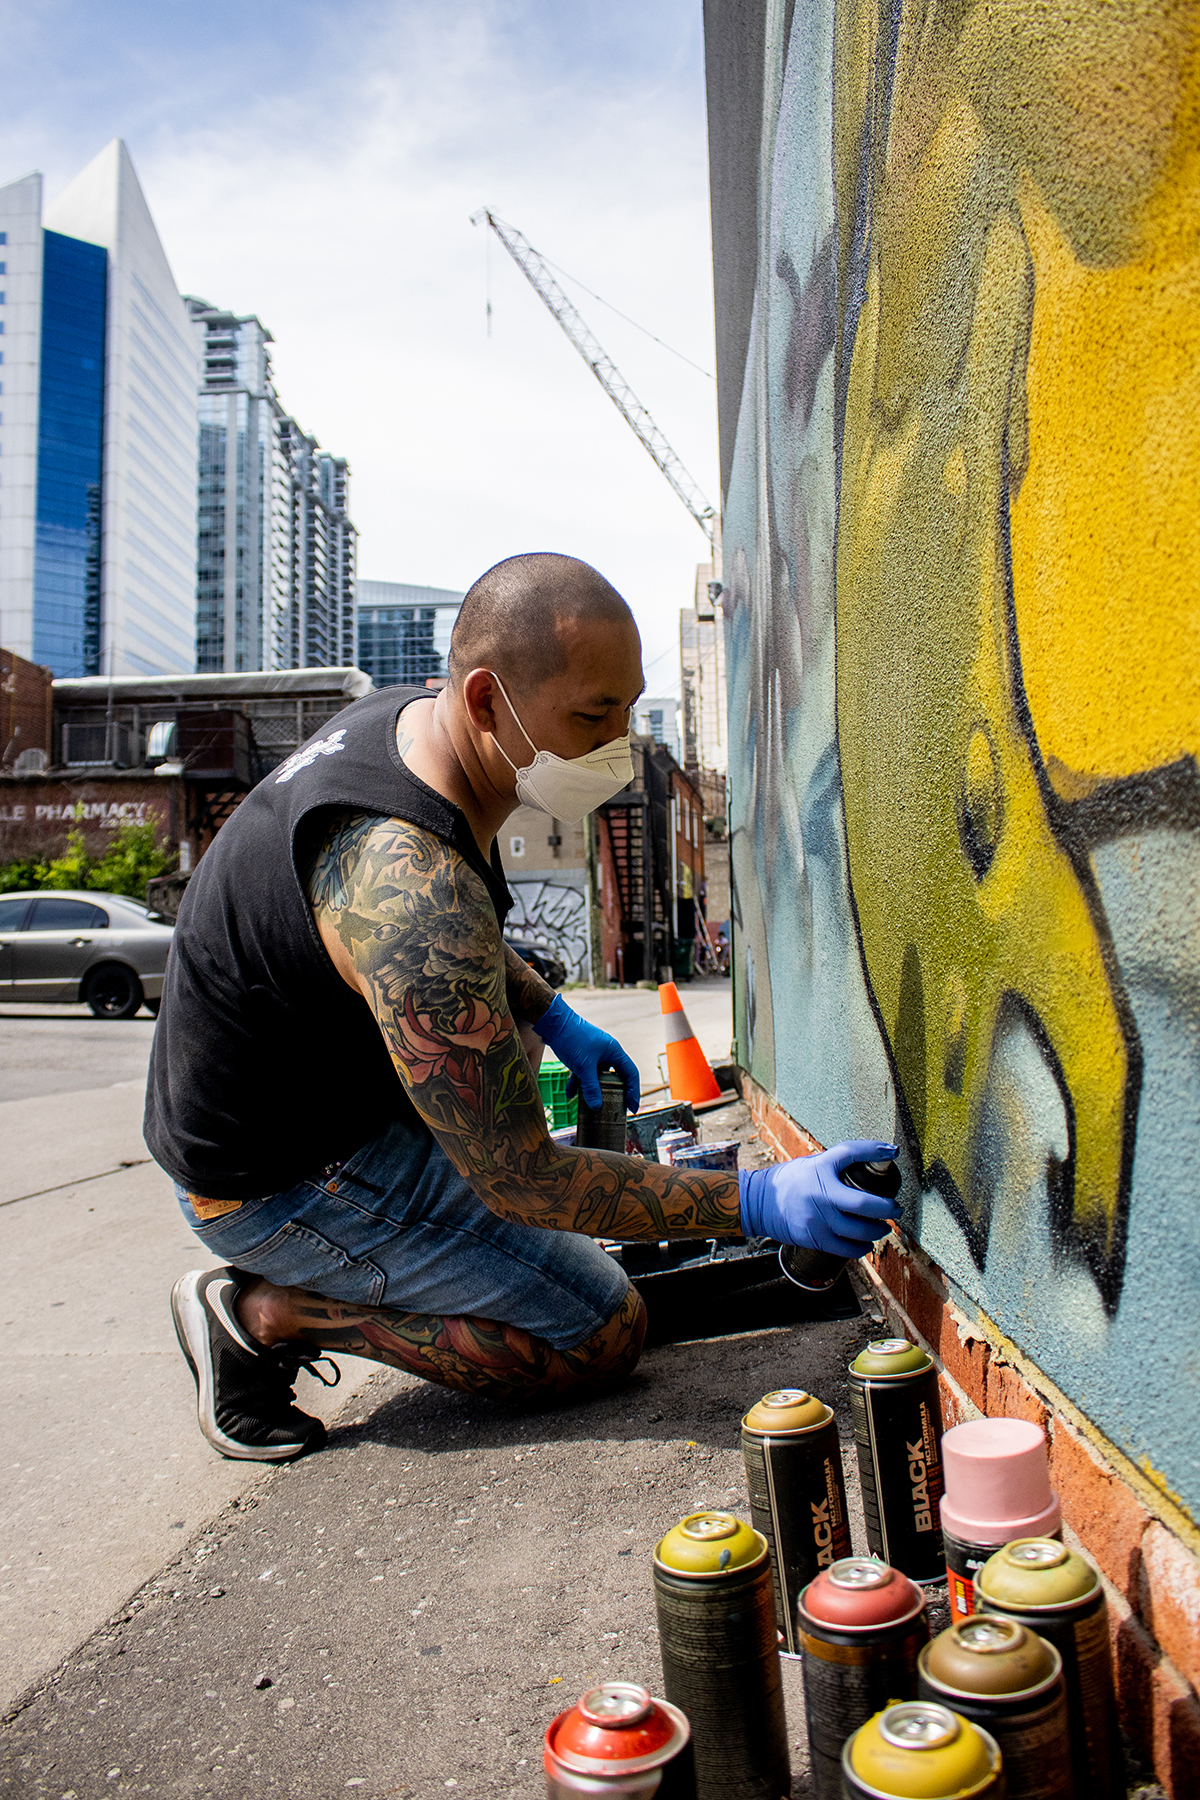 Photograph of artist Eugene Lee painting his mural on a building, it features a large frog/toad that is olive green and yellow in colour. There is also a red snail painting to the right side of the image.